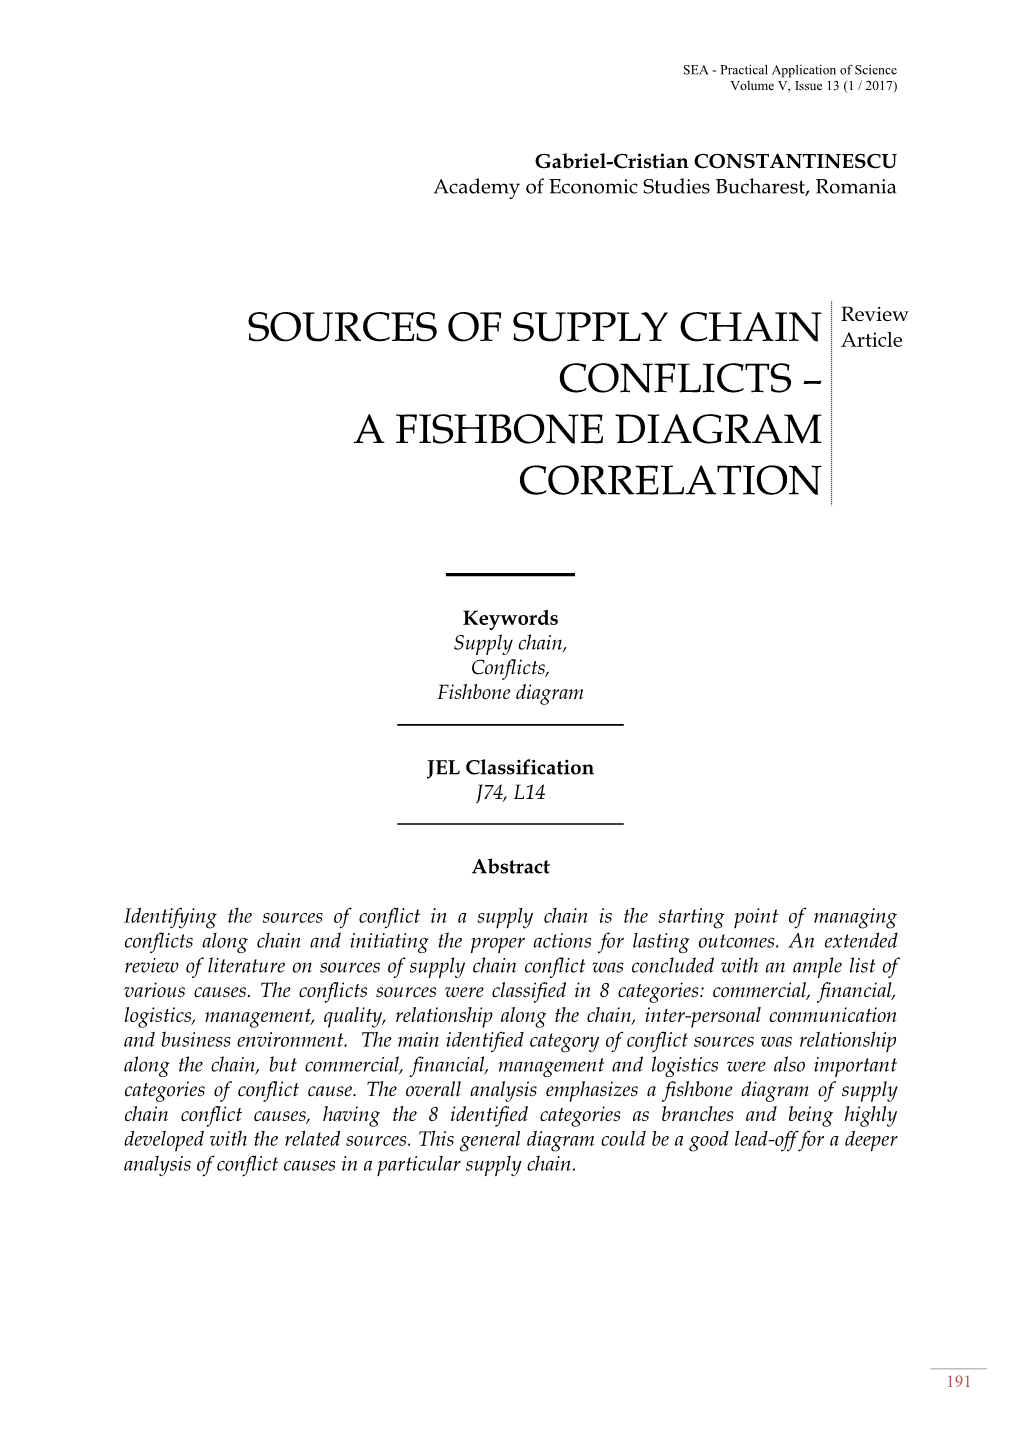 Sources of Supply Chain Conflicts